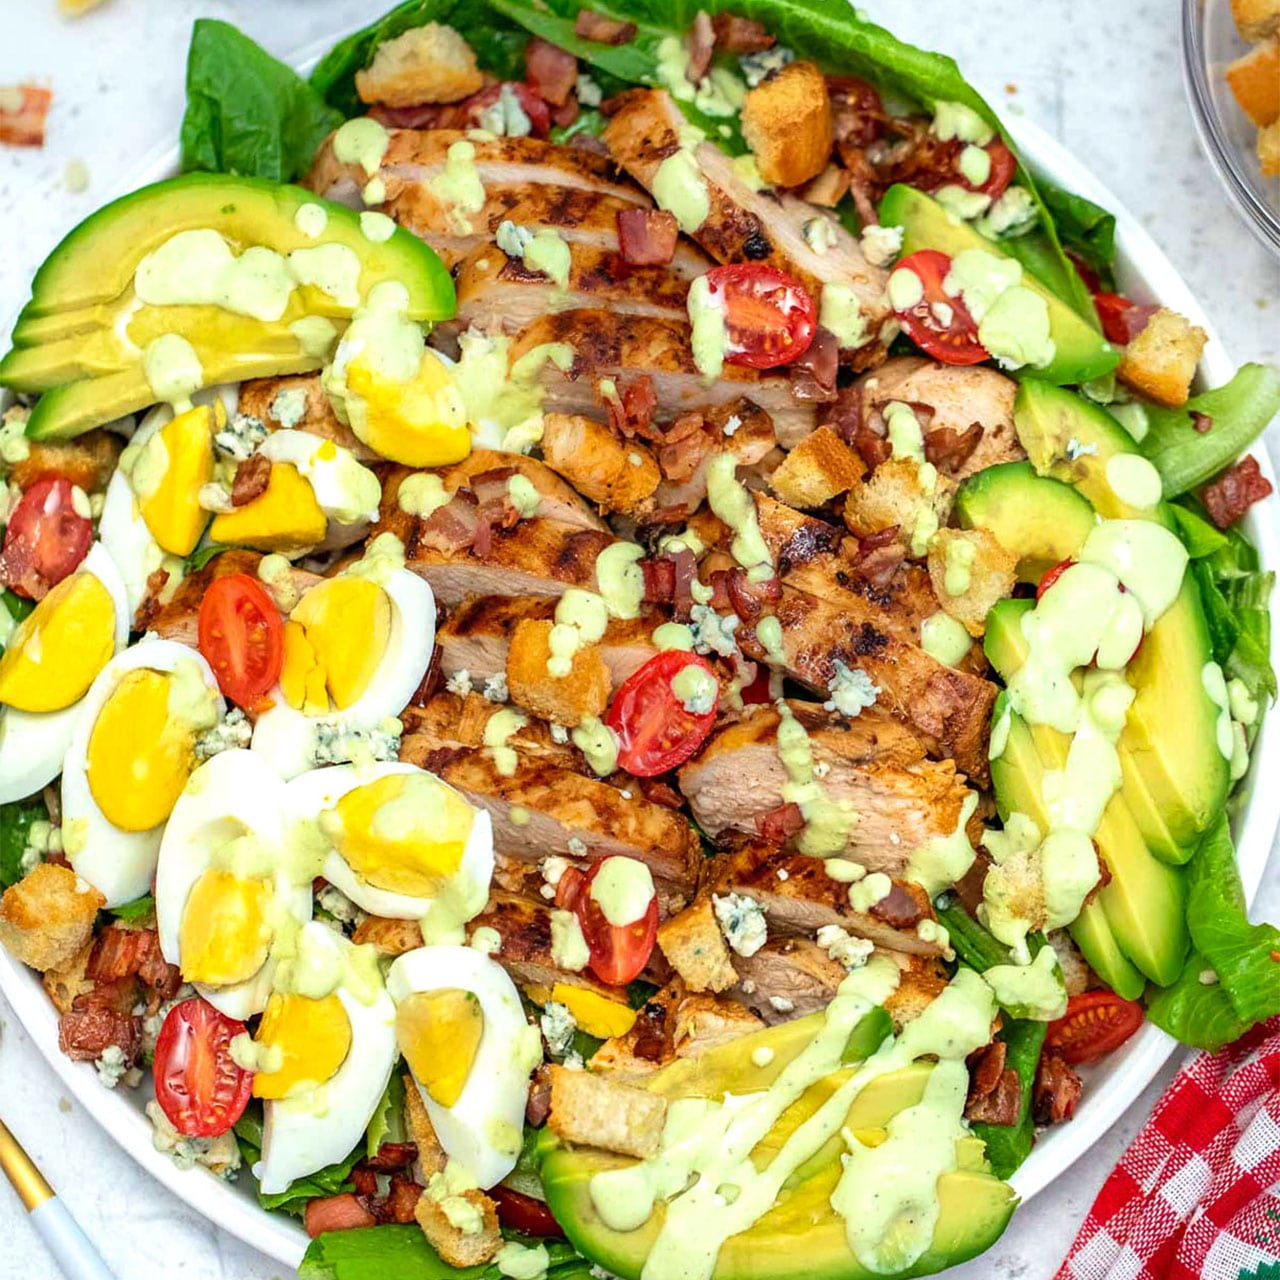 Classic Cobb Salad Recipe [Video] - Sweet and Savory Meals